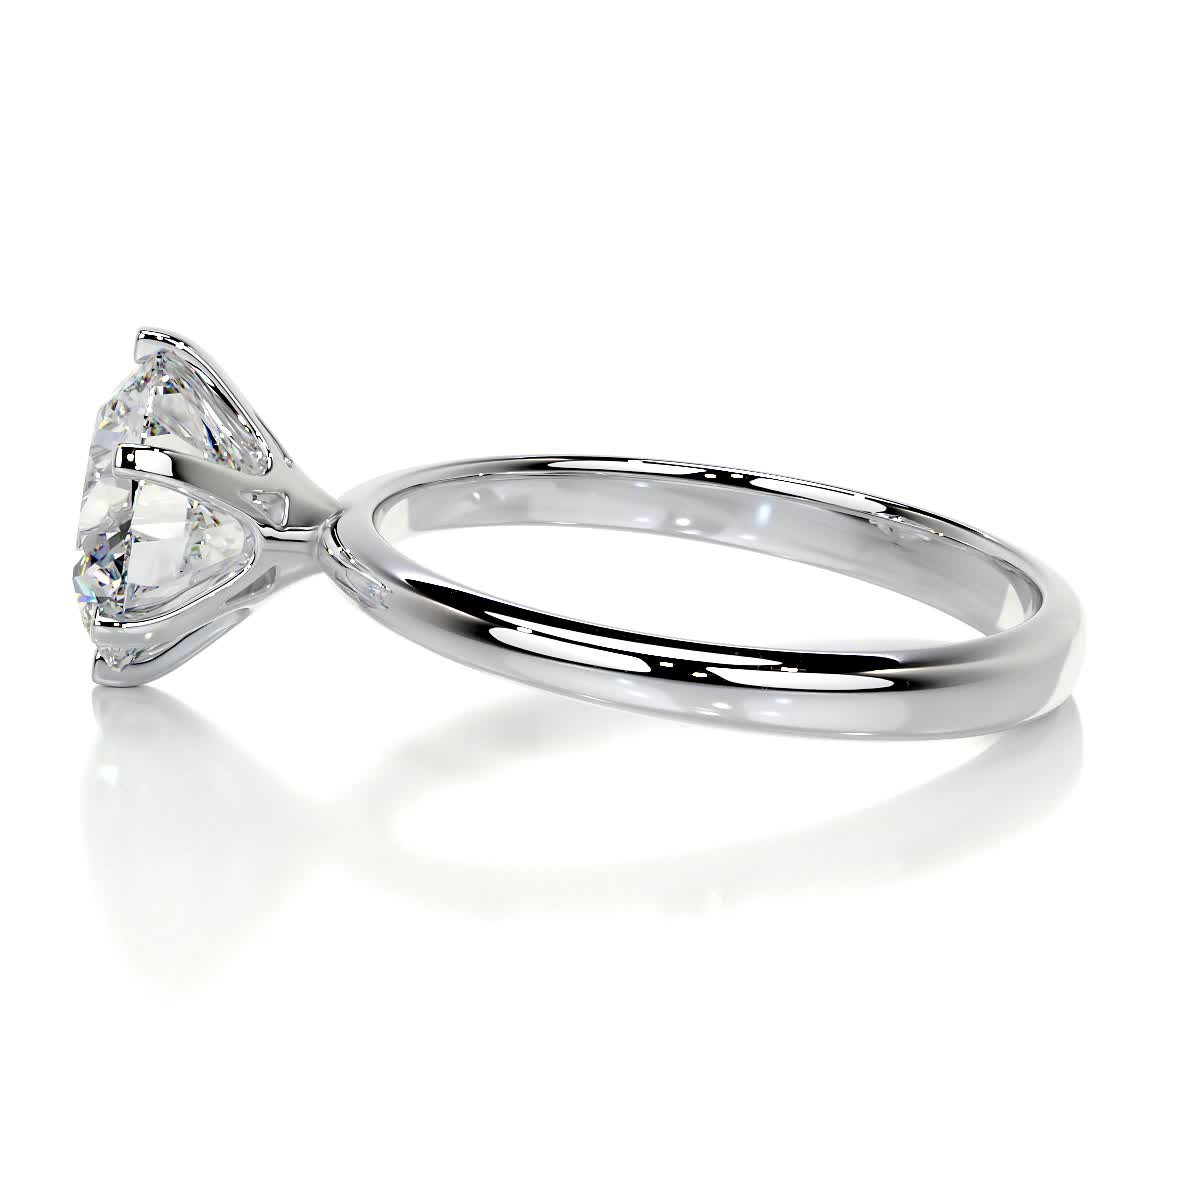 2.50 CT Round Solitaire CVD G/SI1 Diamond Engagement Ring 6